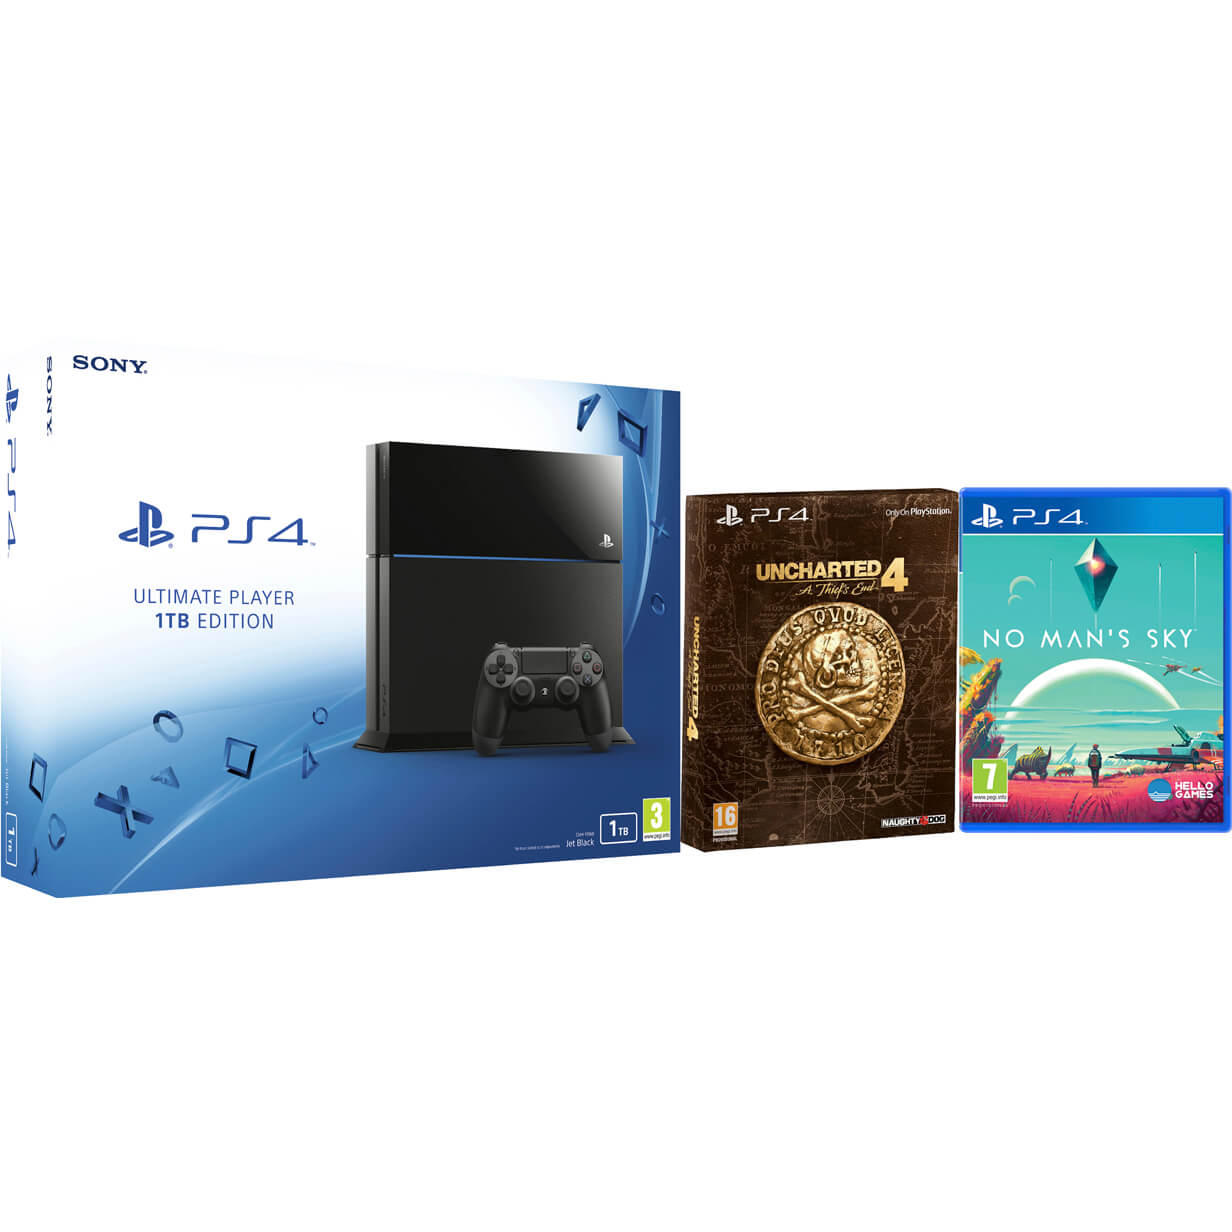 Jeg mistede min vej Trolley resident Sony PlayStation 4 1TB Ultimate Player Edition Console - Includes Uncharted  4: A Thief's End - Special Edition + No Man's Sky Games Consoles - Zavvi CA